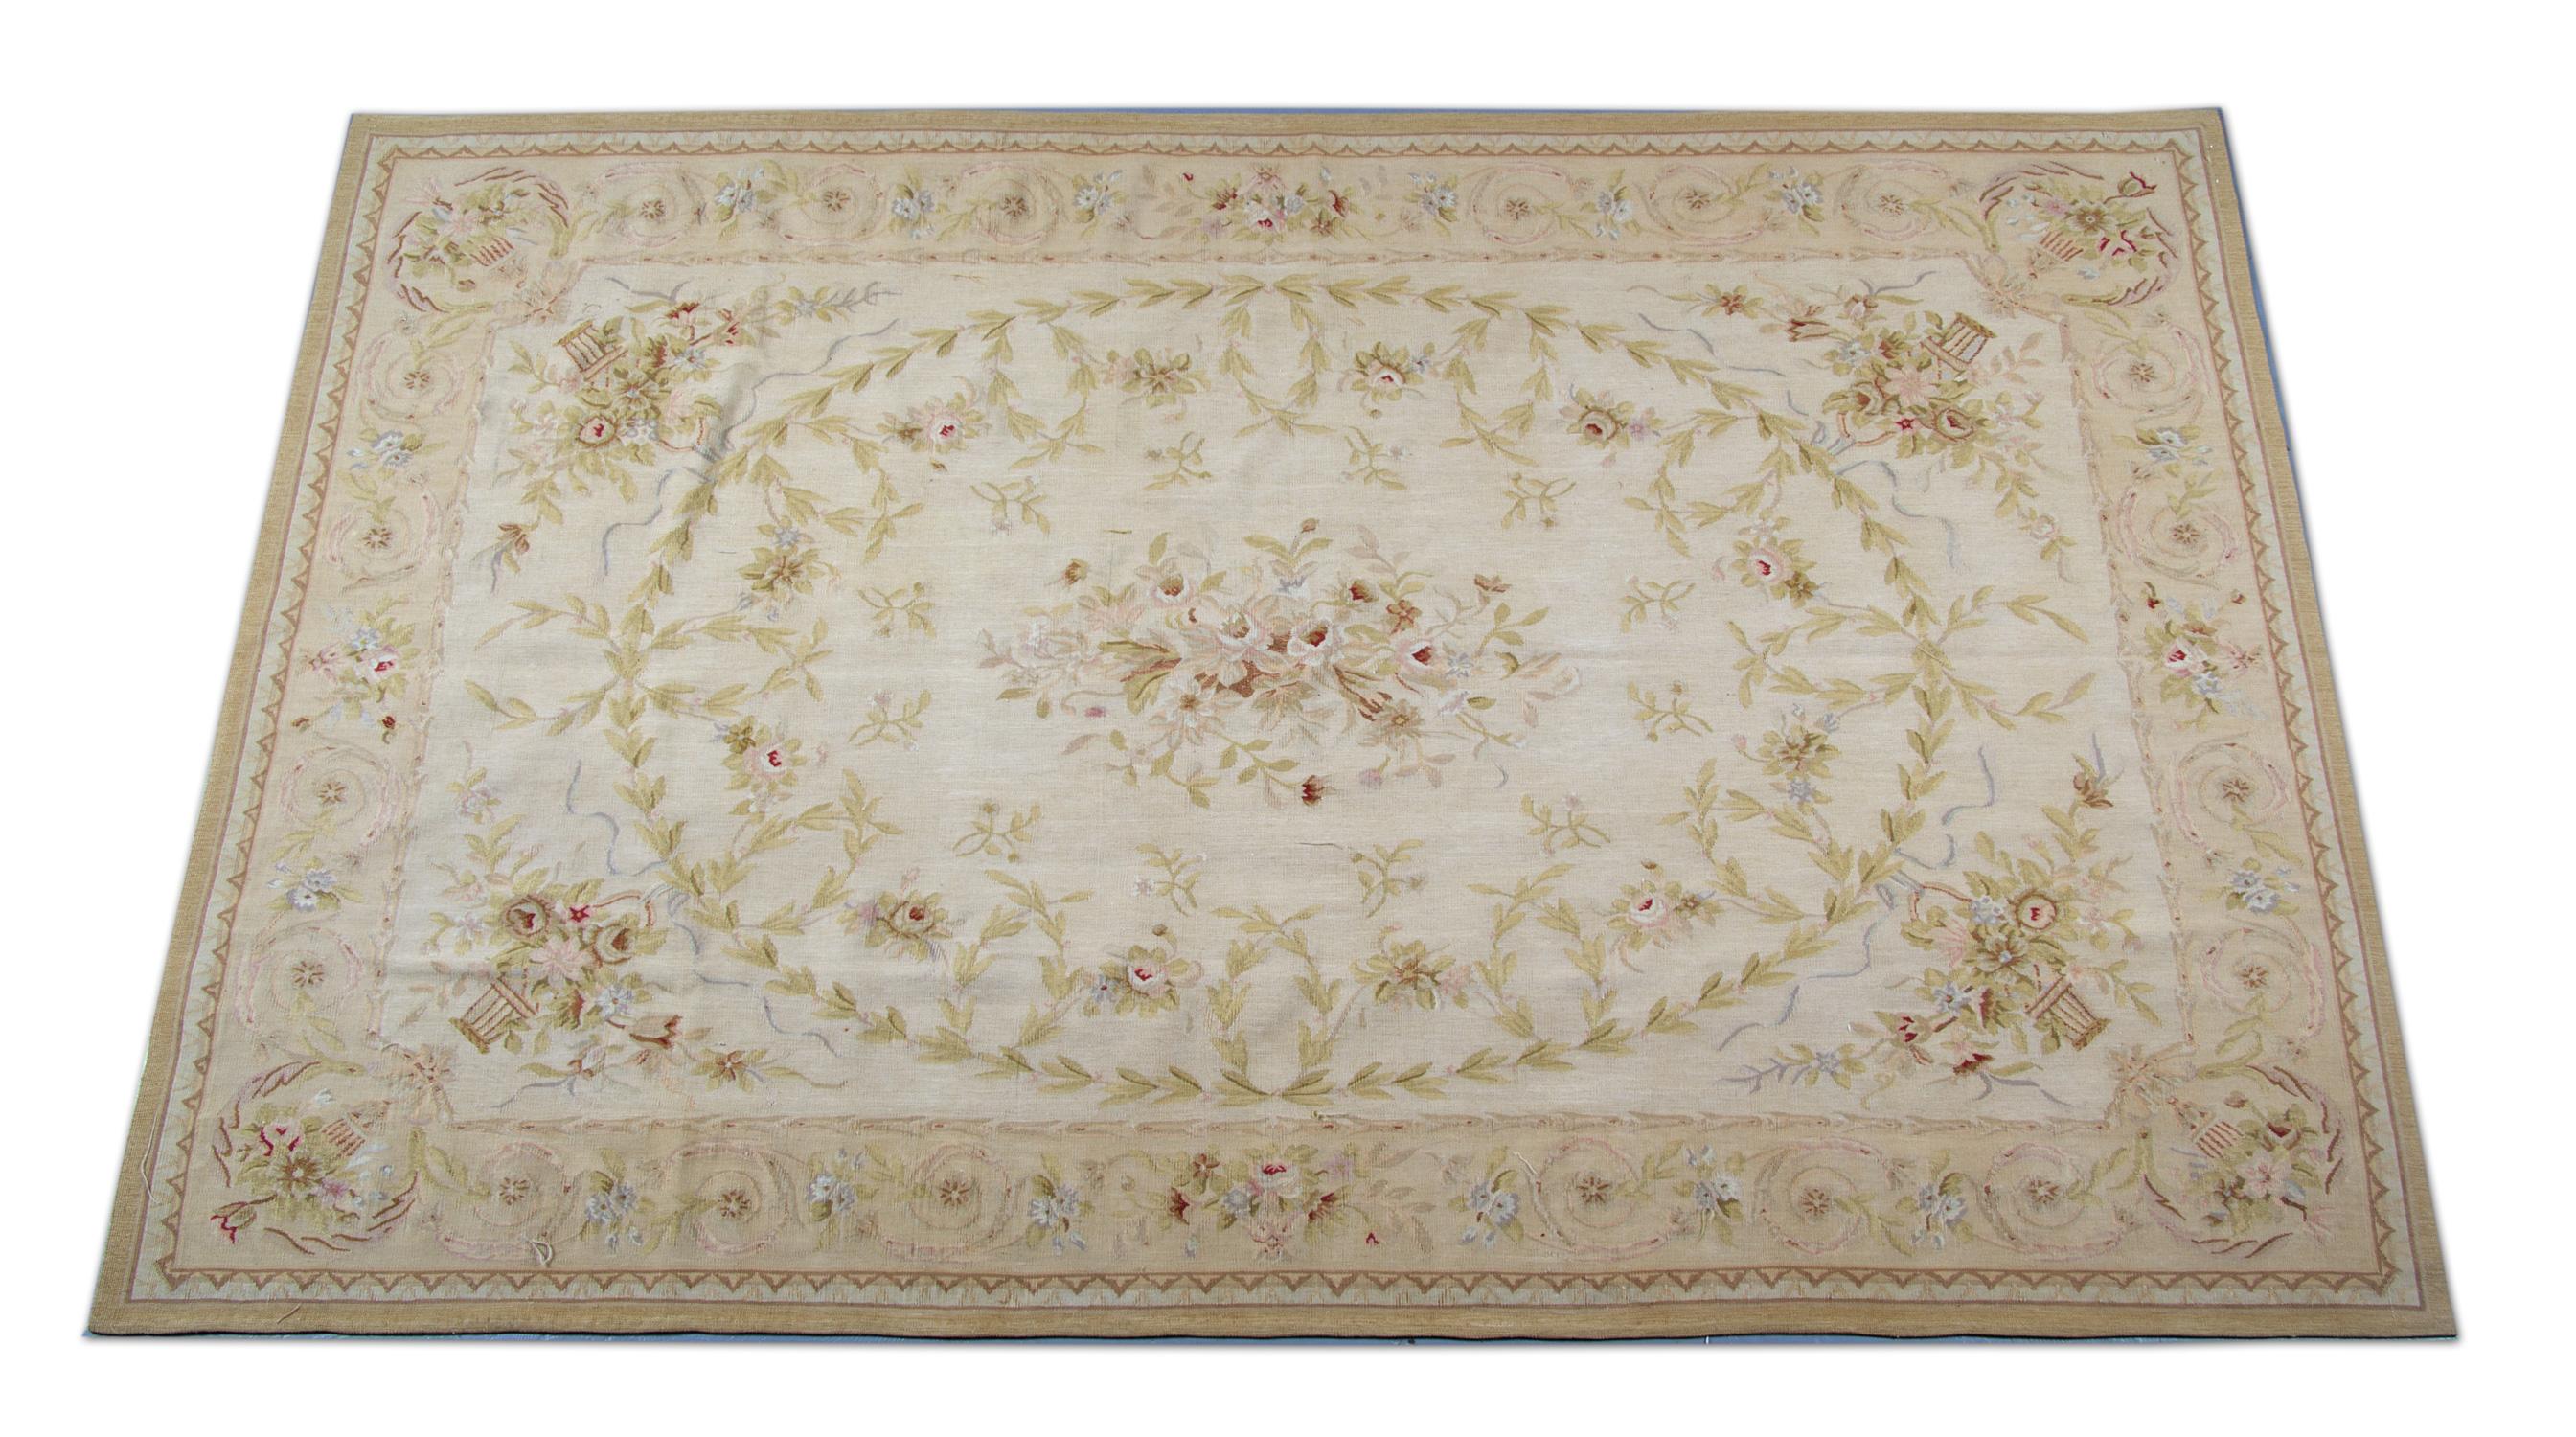 This beautifully handwoven Aubusson reveals a traditional floral design. Woven symmetrically in subtle creams, greens and beiges that come together to create a magnificent accent piece.
This style of rugs are best known as Aubusson, recognized